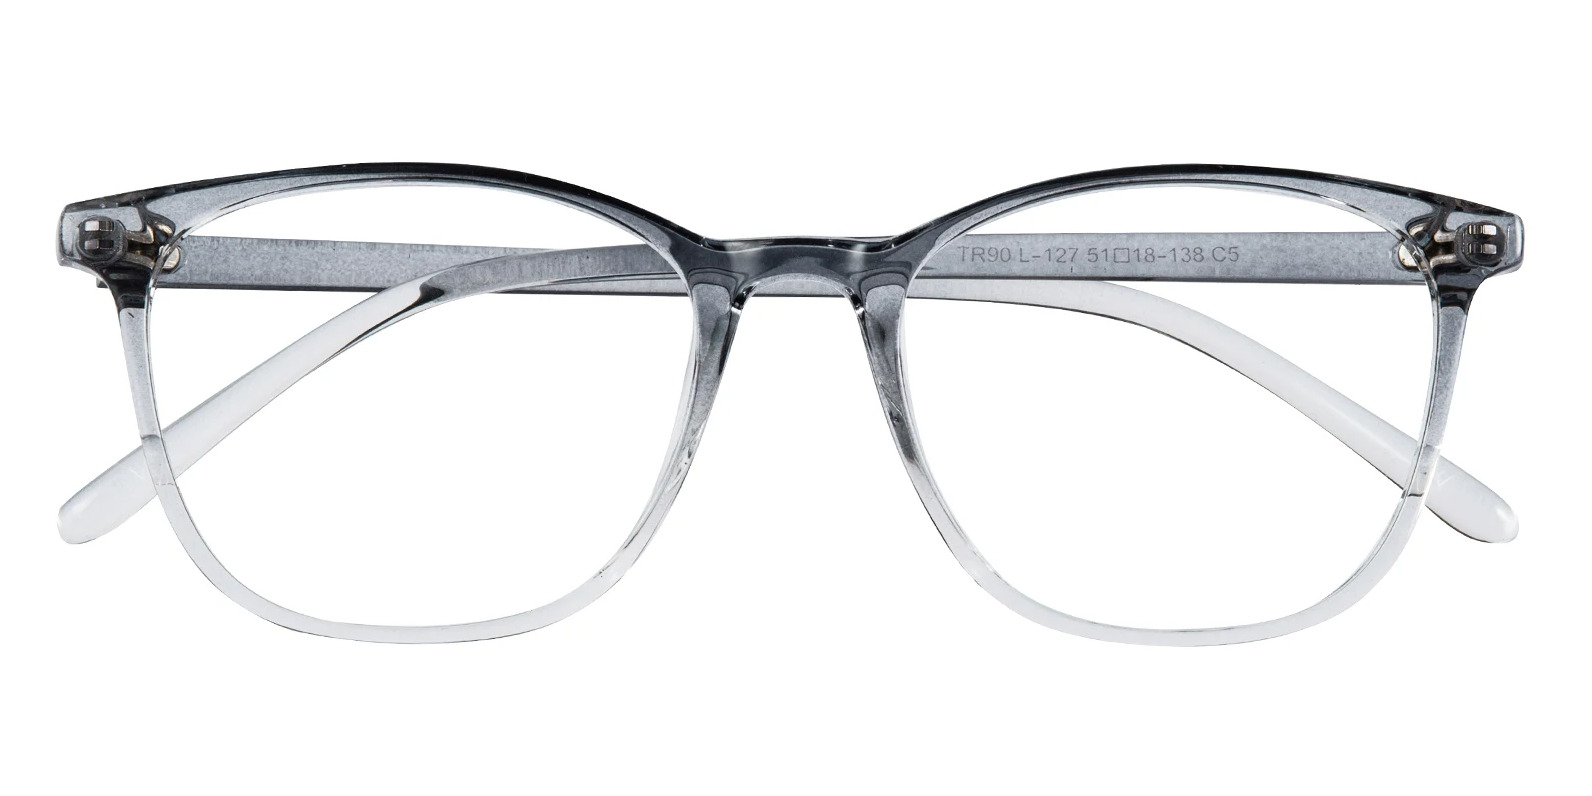 Gray Glasses Frames: Business Class Spectacles For You